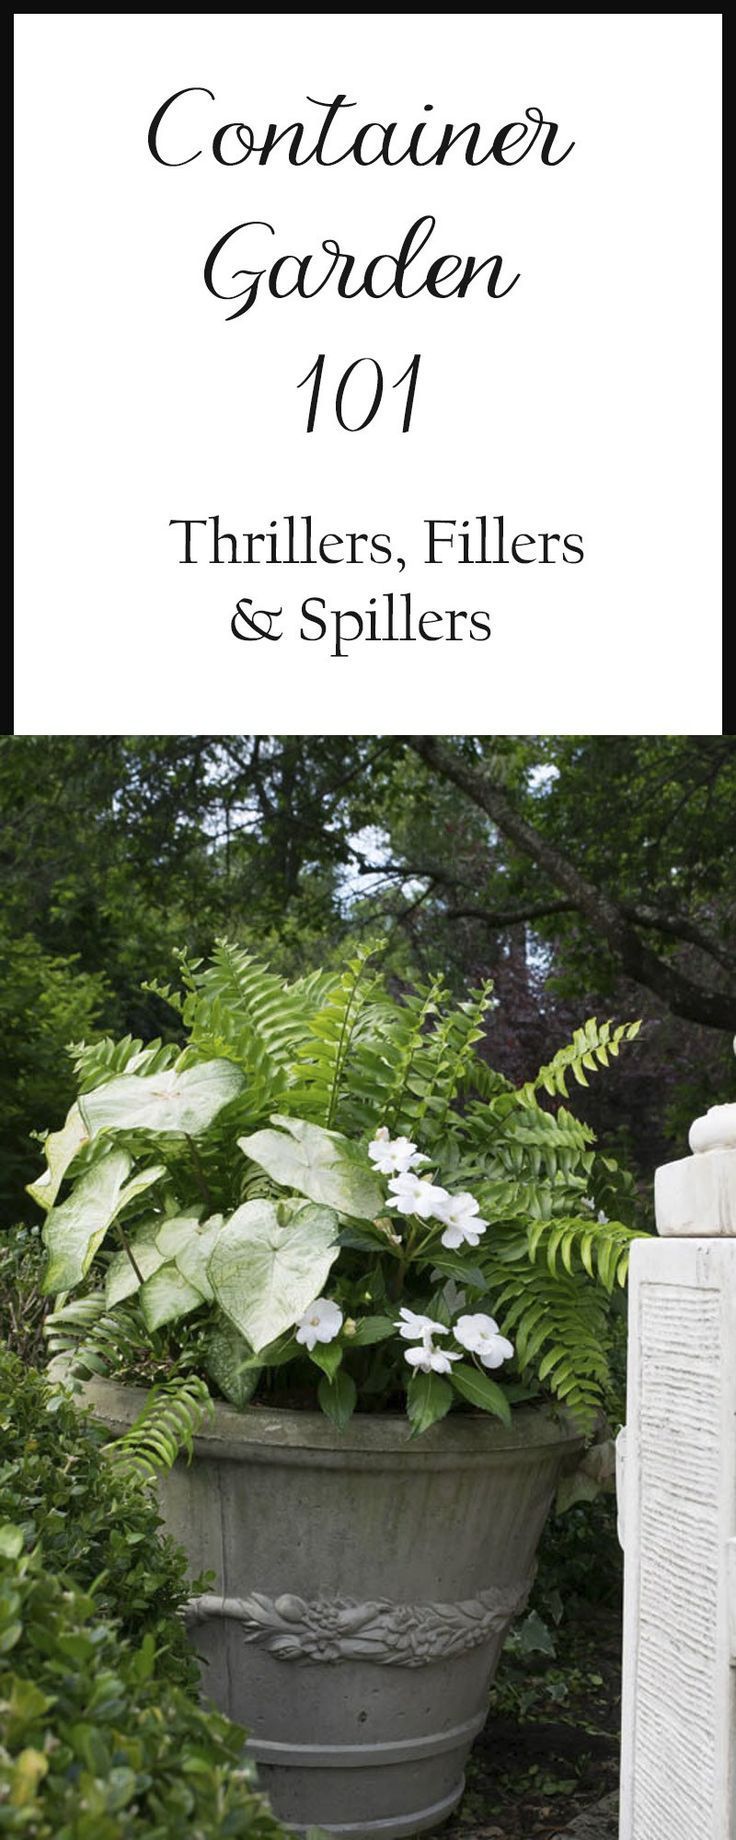 Container Gardening Basics: Thrillers, Fillers and Spillers